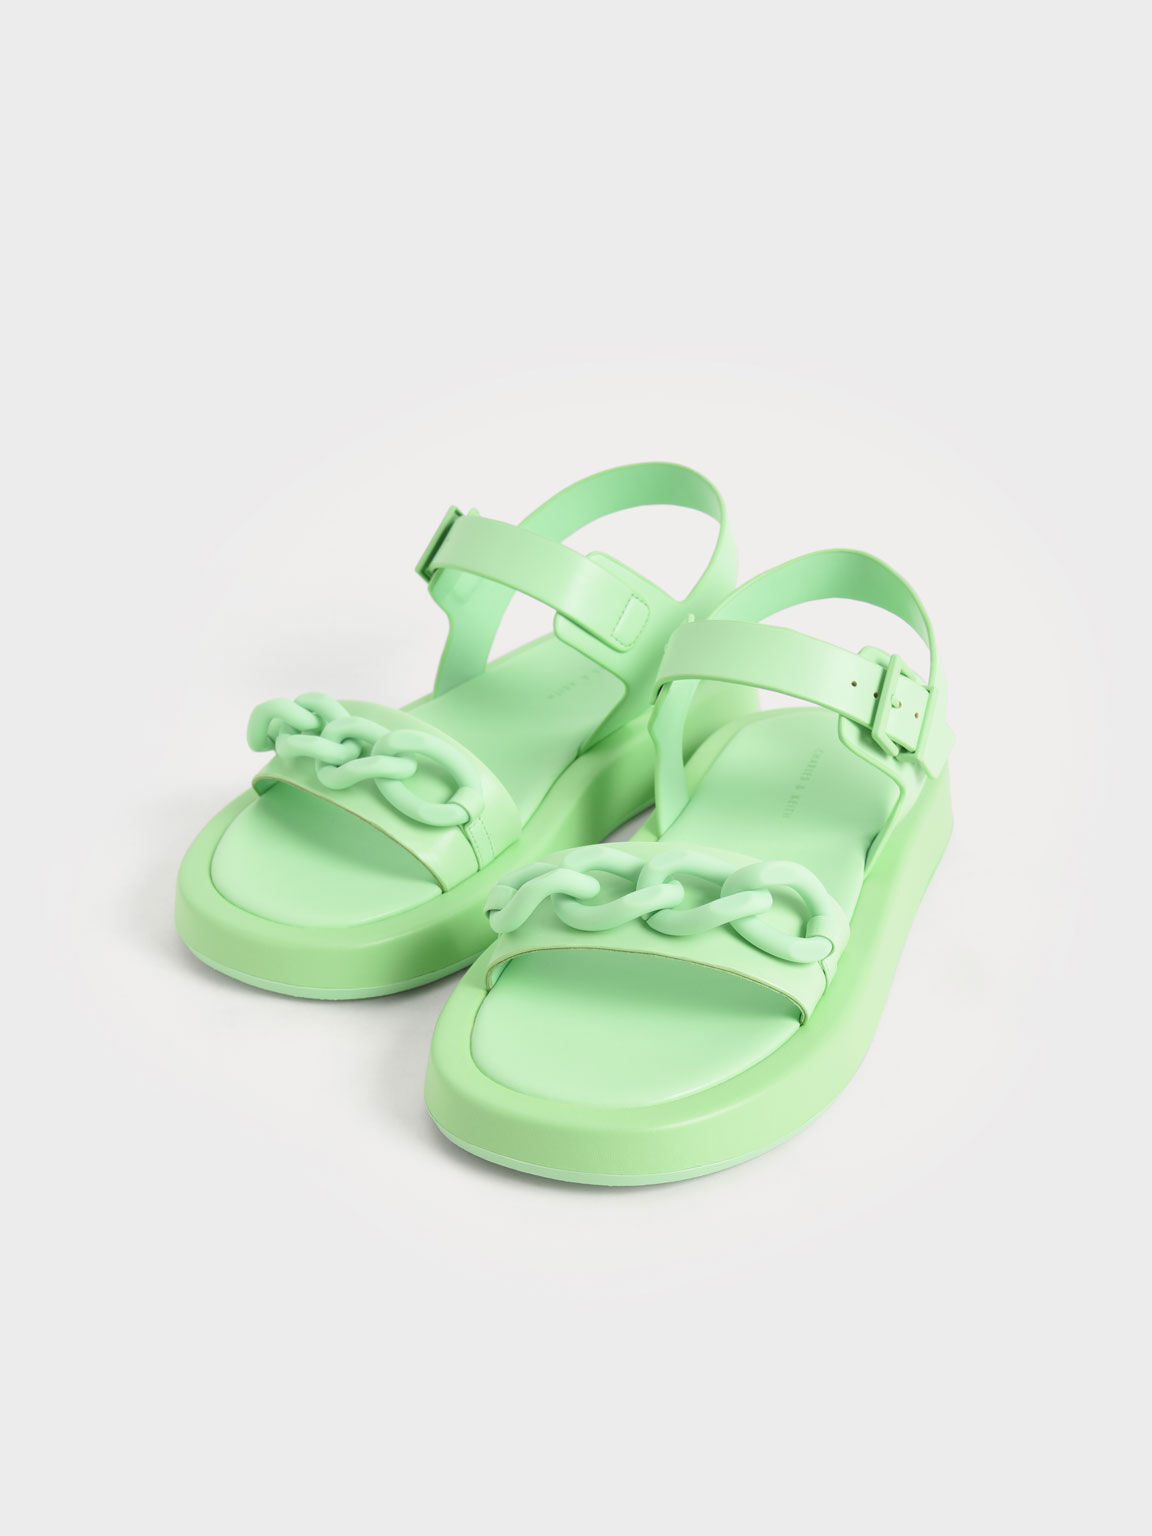 Chunky Chain-Link Ankle-Strap Padded Sandals, Green, hi-res